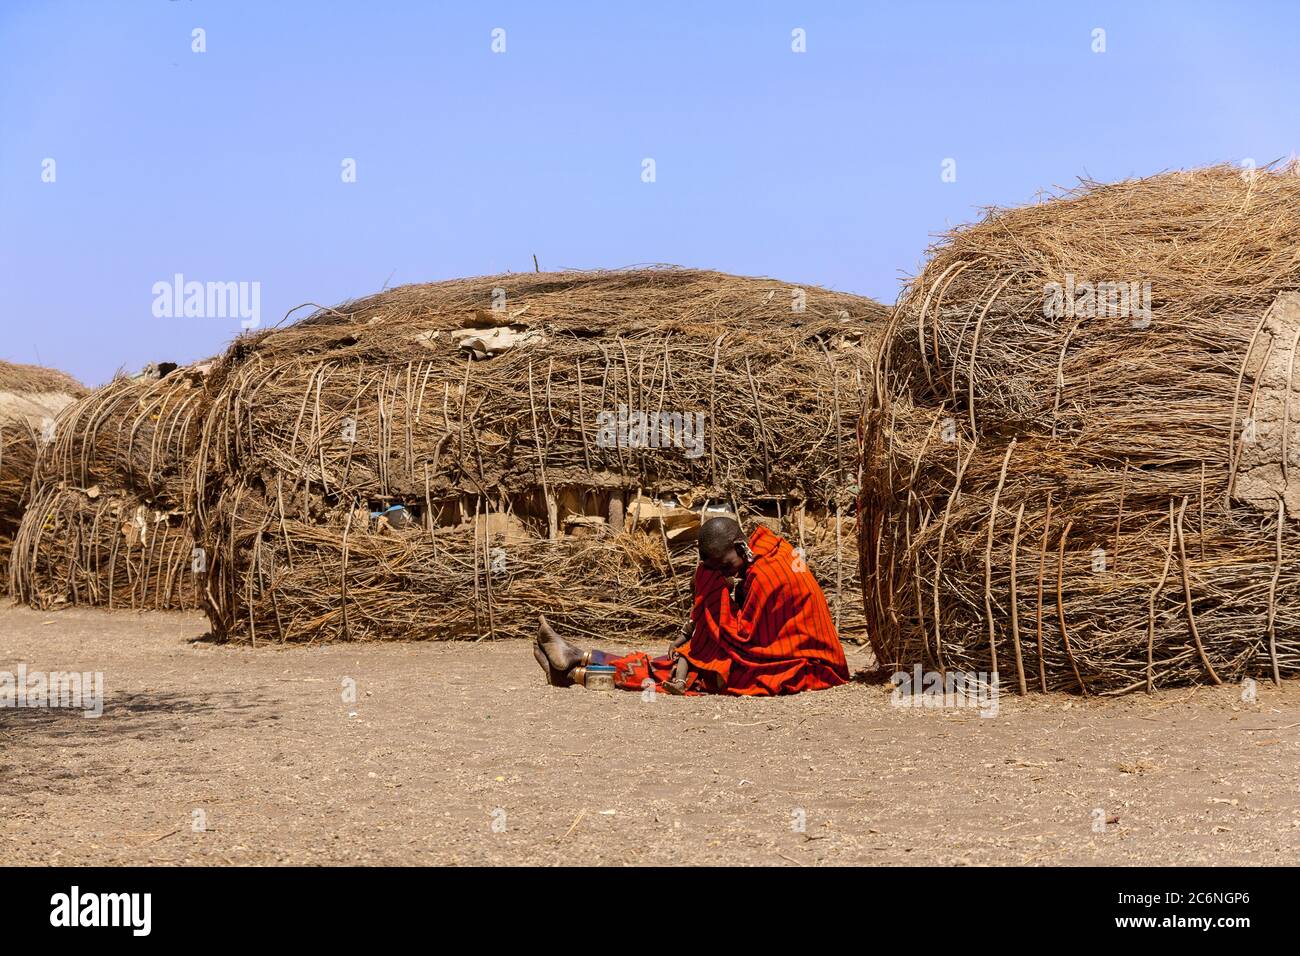 Serengeti, Tanzania - September 21. 2012: A Massai woman in red in front of the traditional huts inside an Massai village in the Serengeti National Pa Stock Photo